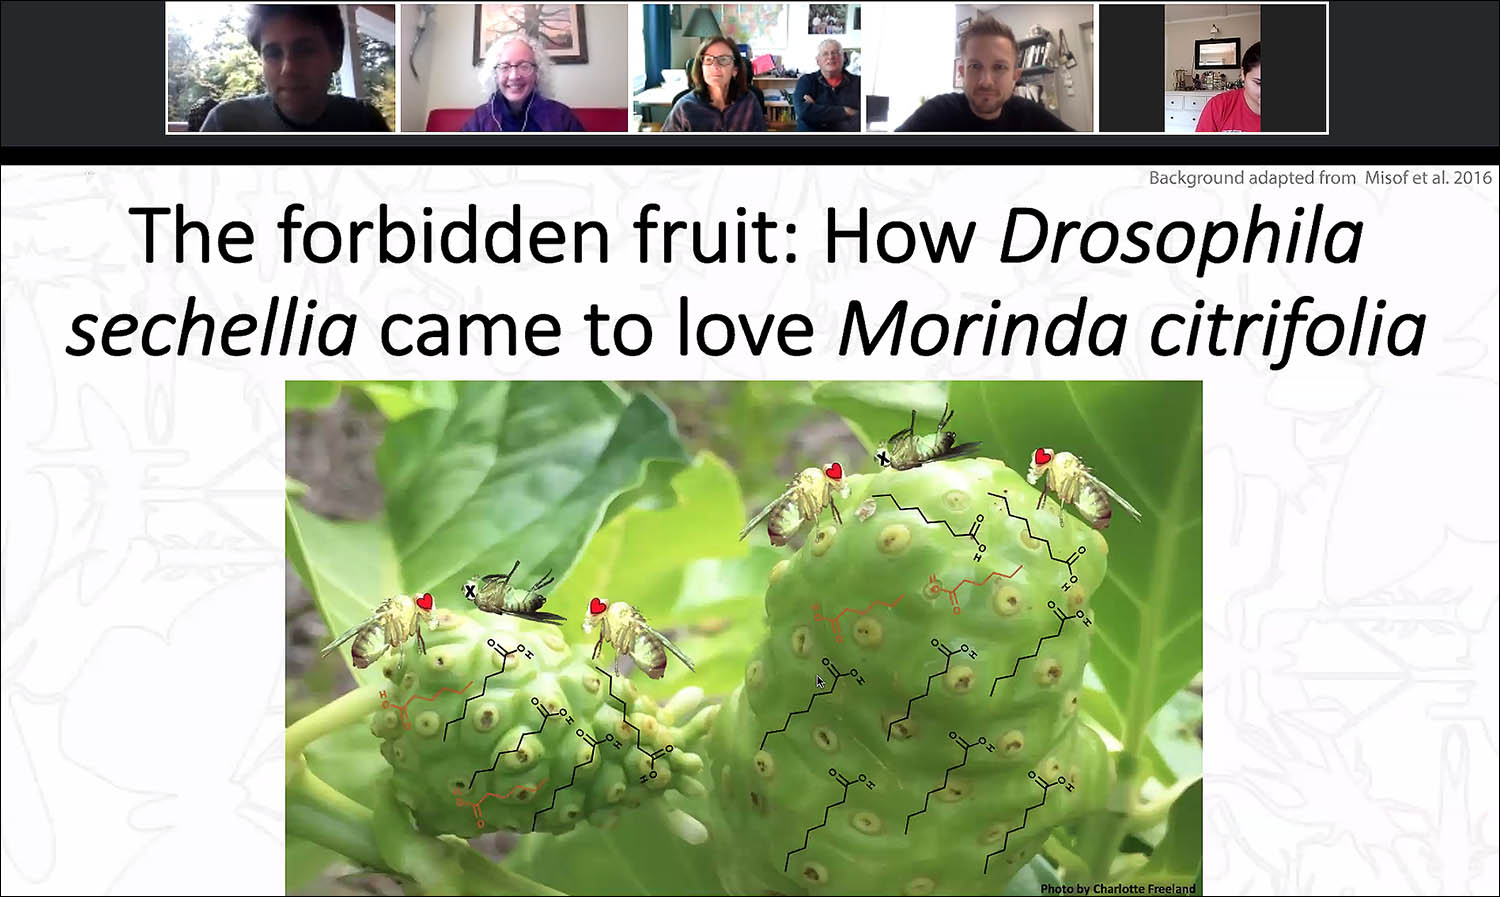 Zachary Drum, a PhD candidate in biology, delivered the first 2020-21 Graduate Speaker Series talk on Oct. 2 through Zoom. Titled "The Forbidden Fruit: How Drosophila sechellia came to Love Morinda citrifolia," Drum's research explores how a fruit fly species in Africa is able to eat a poisonous fruit that flies in the the rest of the world would find toxic.